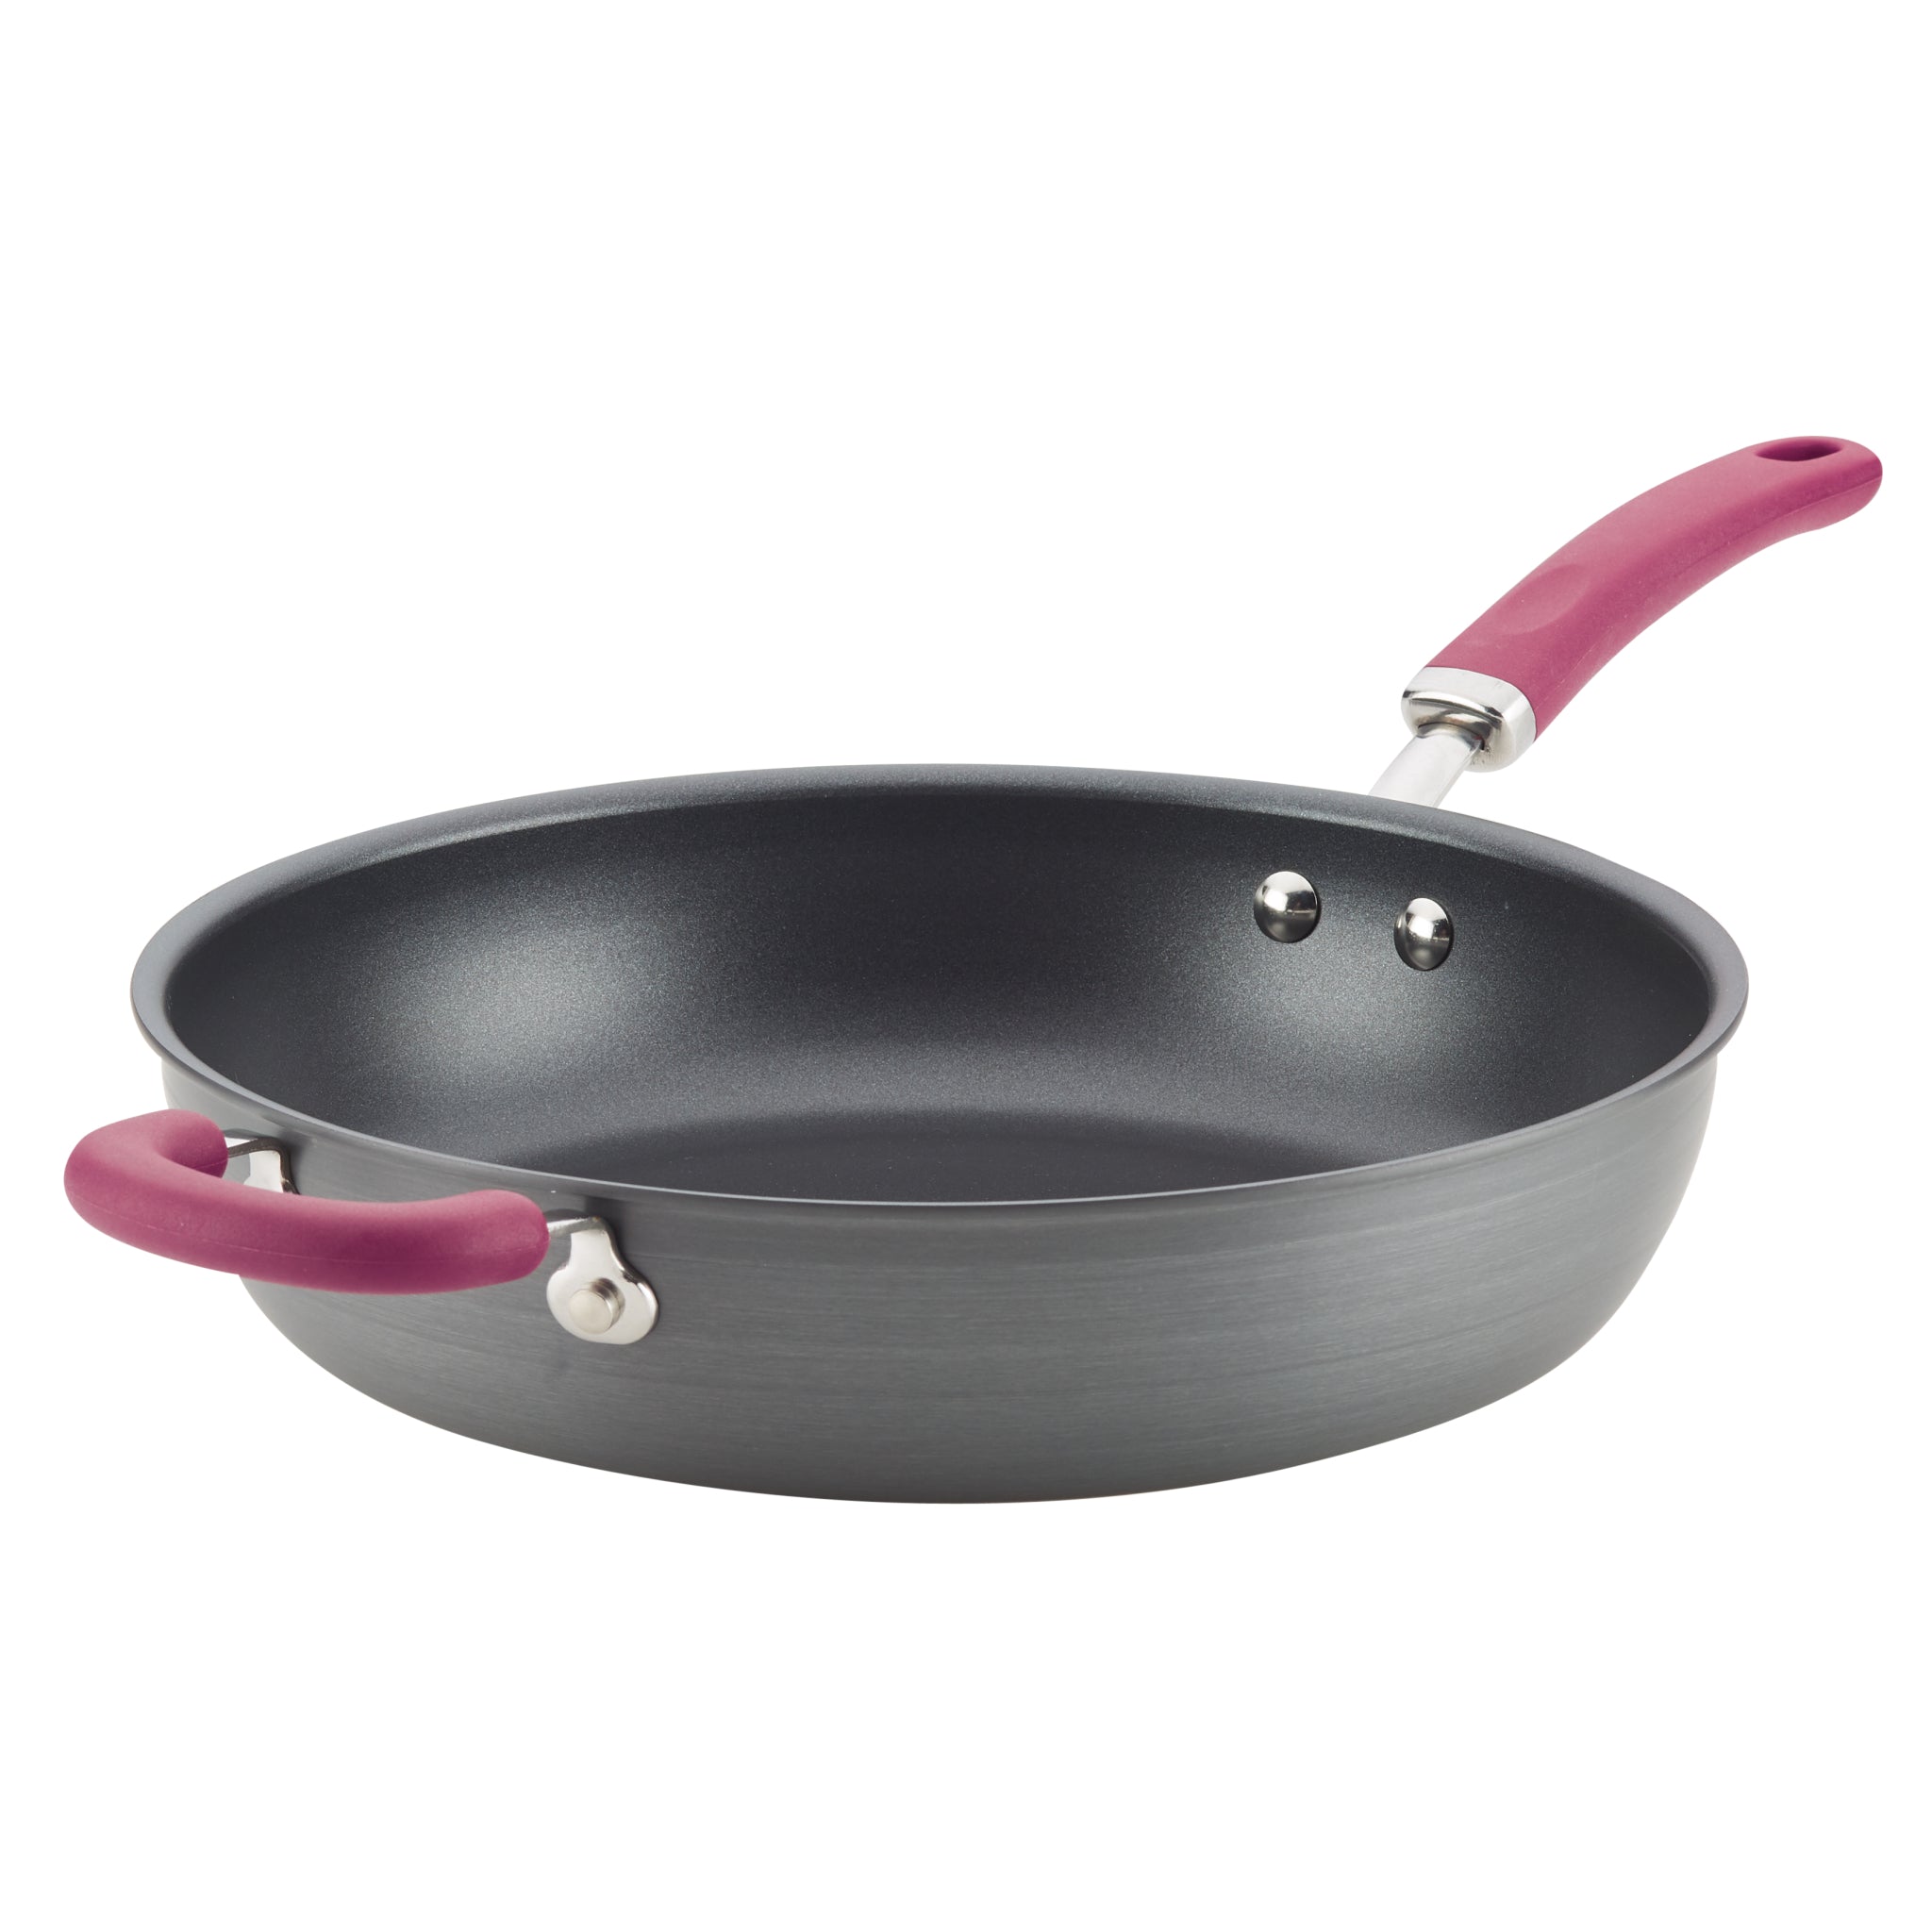 12.5-Inch Create Delicious Anodized Nonstick Induction Deep Frying Pan with Helper Handle